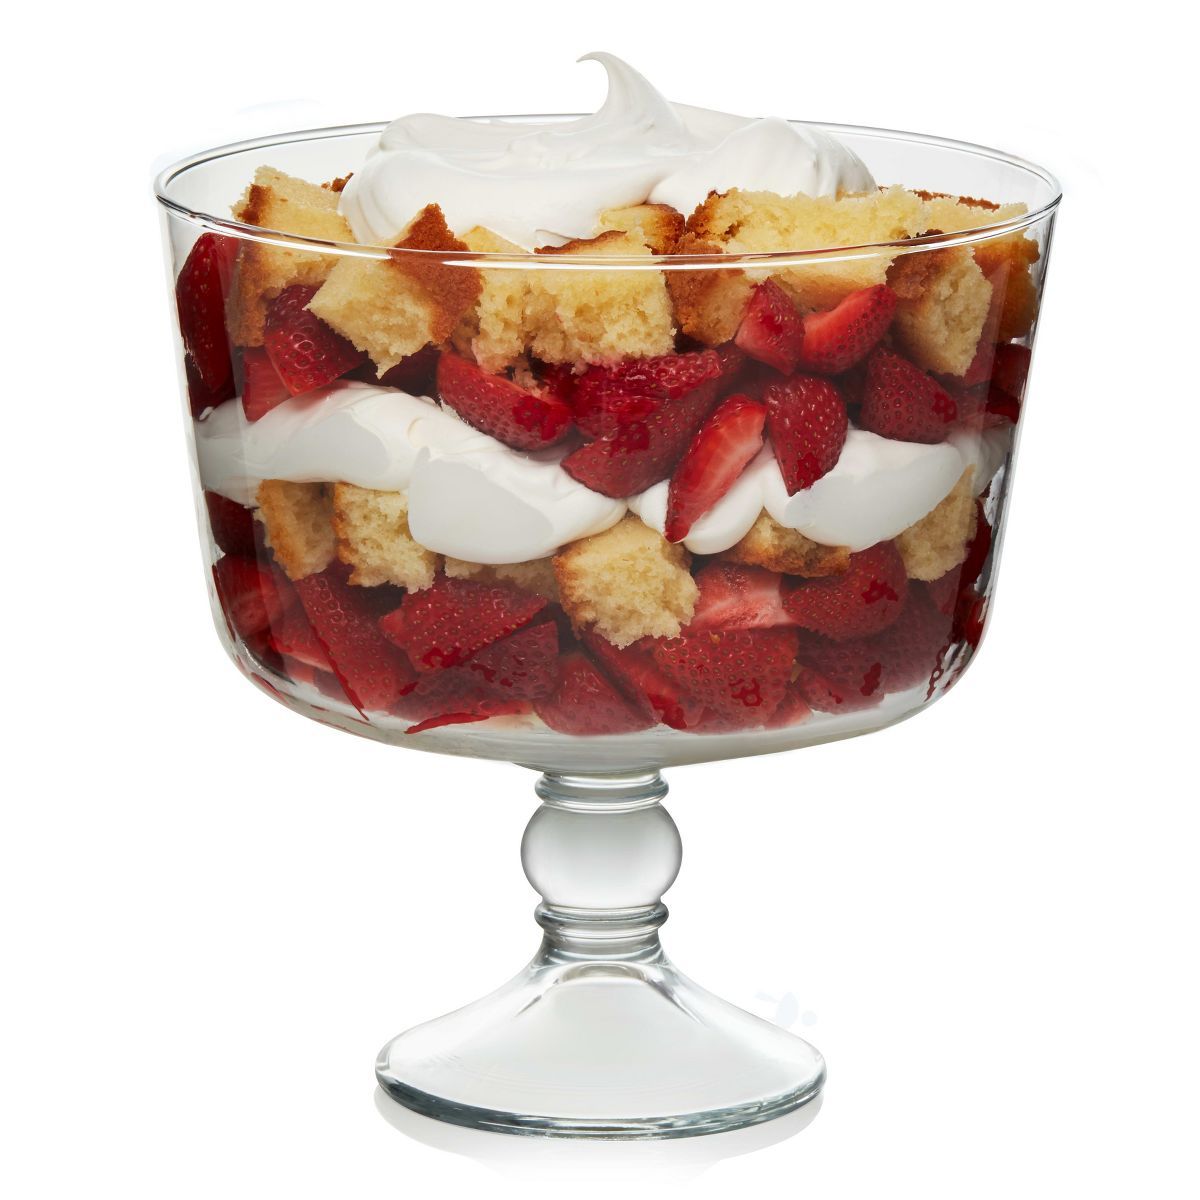 Libbey Selene Footed Glass Trifle Bowl, 9-inch | Target